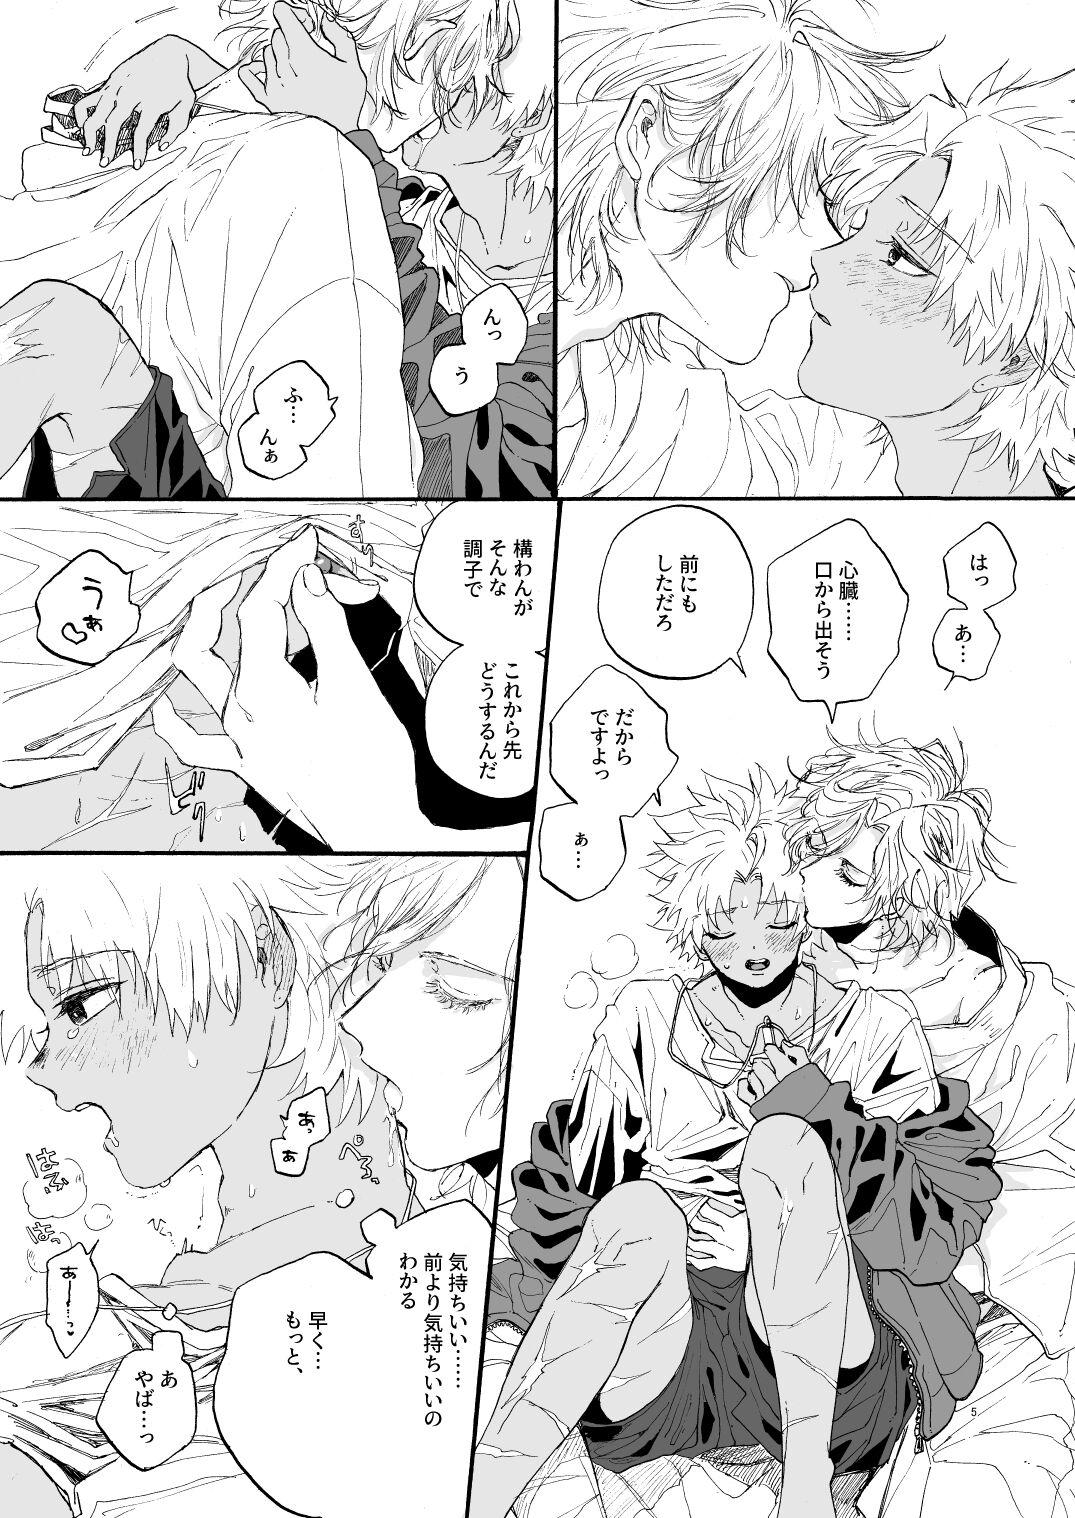 Jerkoff Sotsugyou - Fate grand order Shoplifter - Page 6